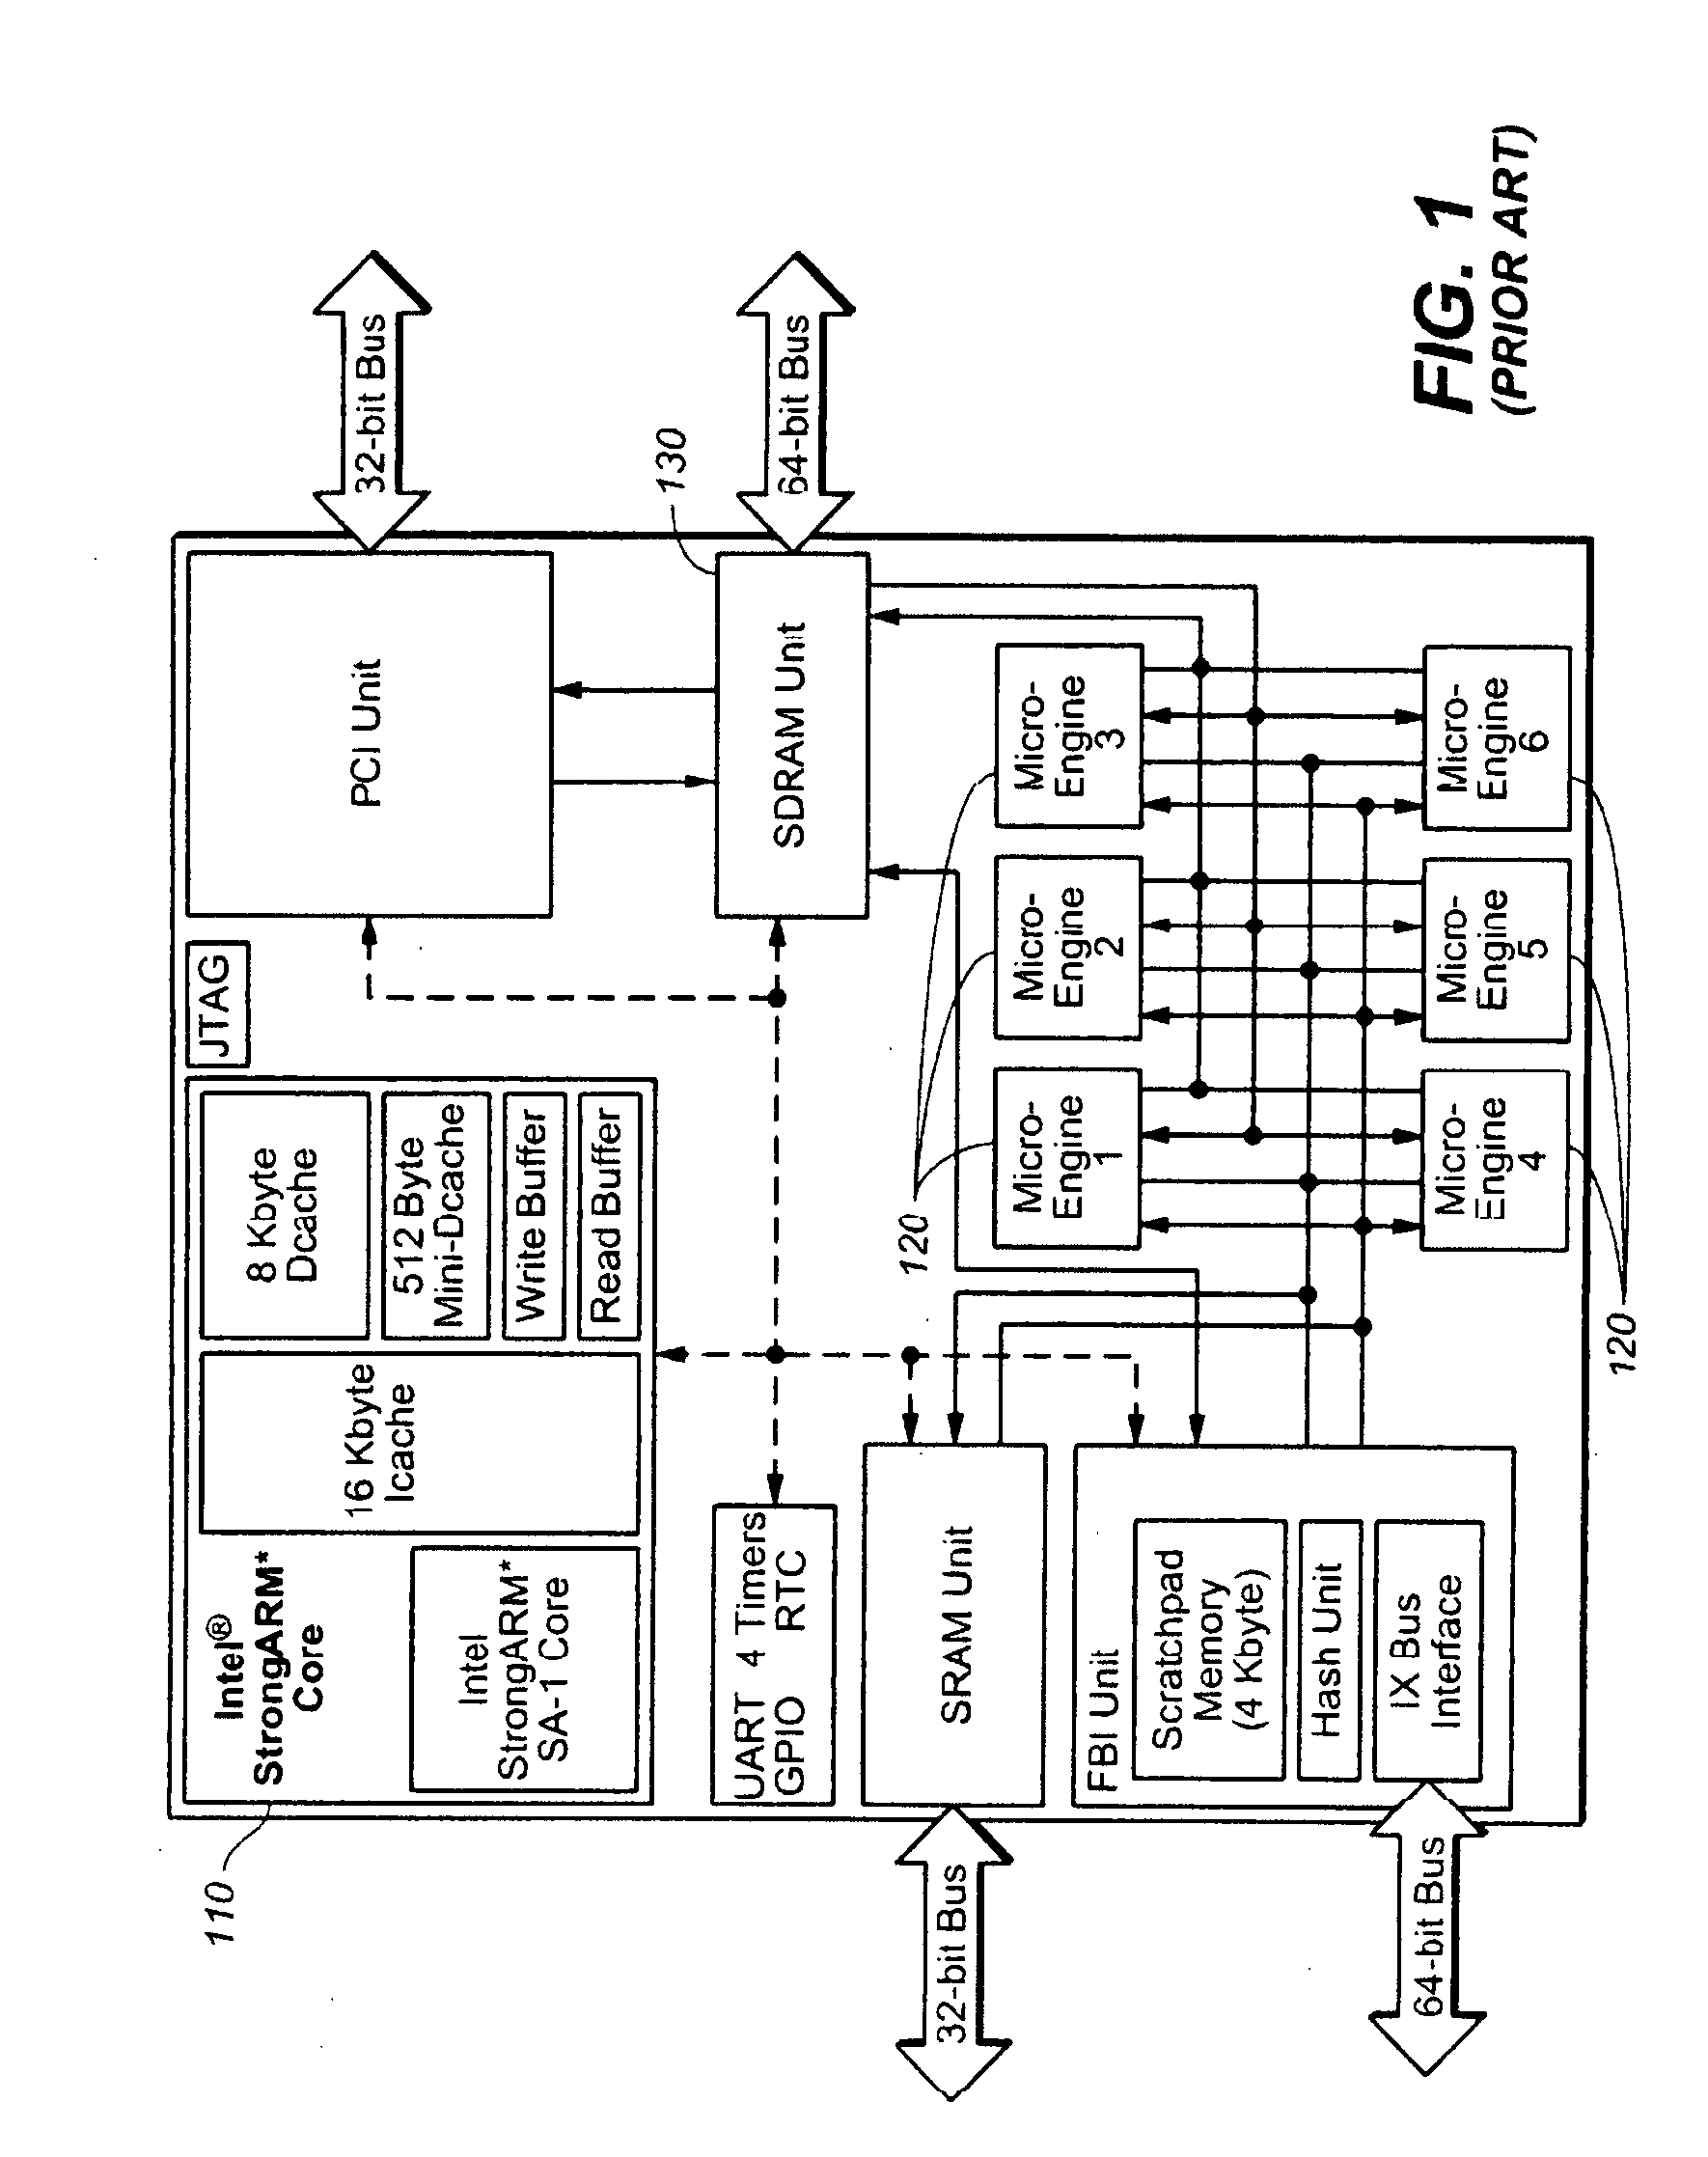 Energy efficient processing device